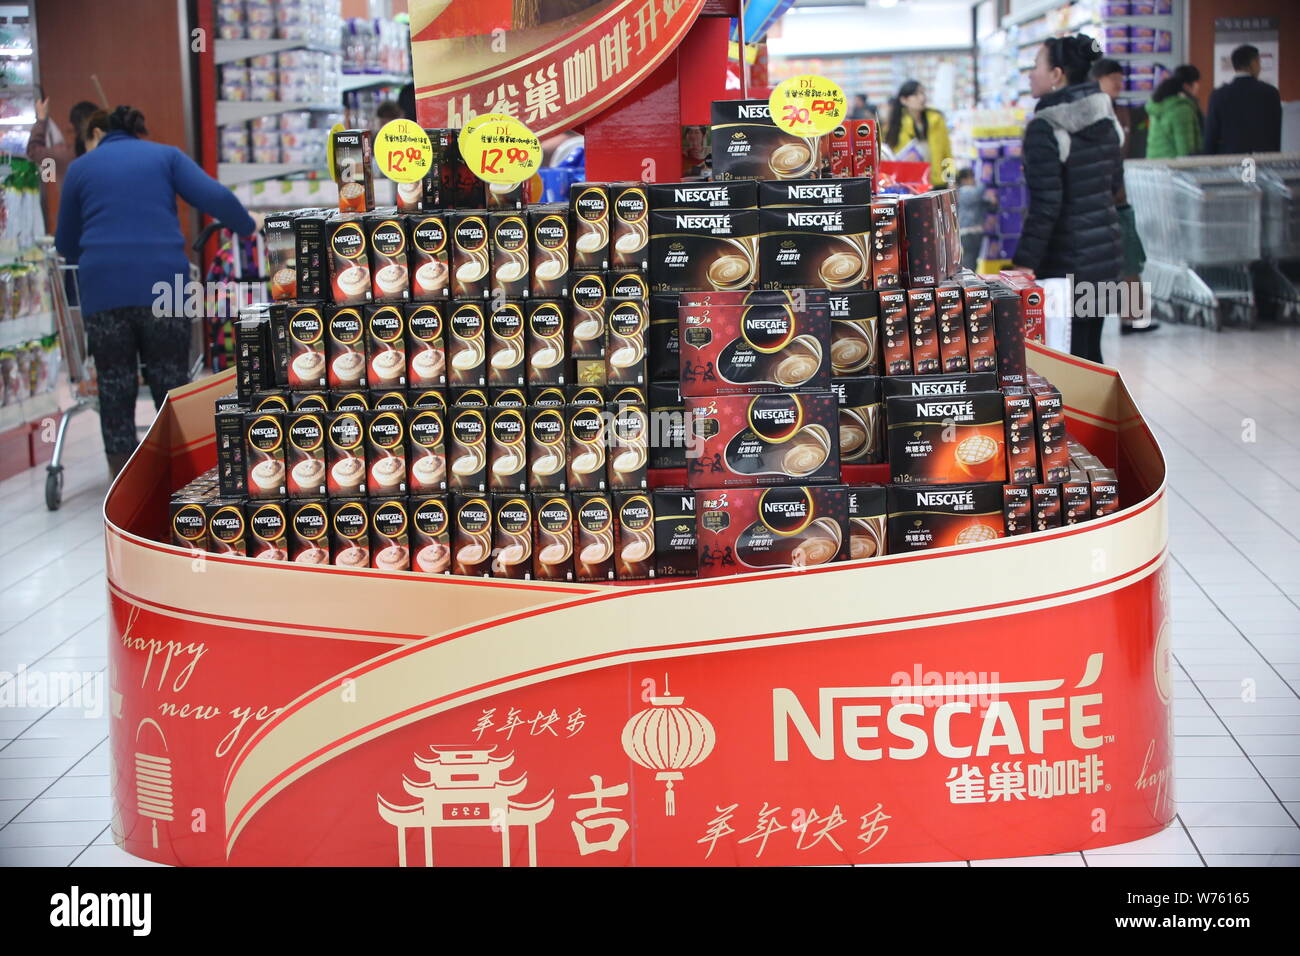 https://c8.alamy.com/comp/W76165/file-cartons-of-nescafe-instant-coffee-of-nestle-are-for-sale-at-a-supermarket-in-xuchang-city-central-chinas-henan-province-25-january-2015-W76165.jpg